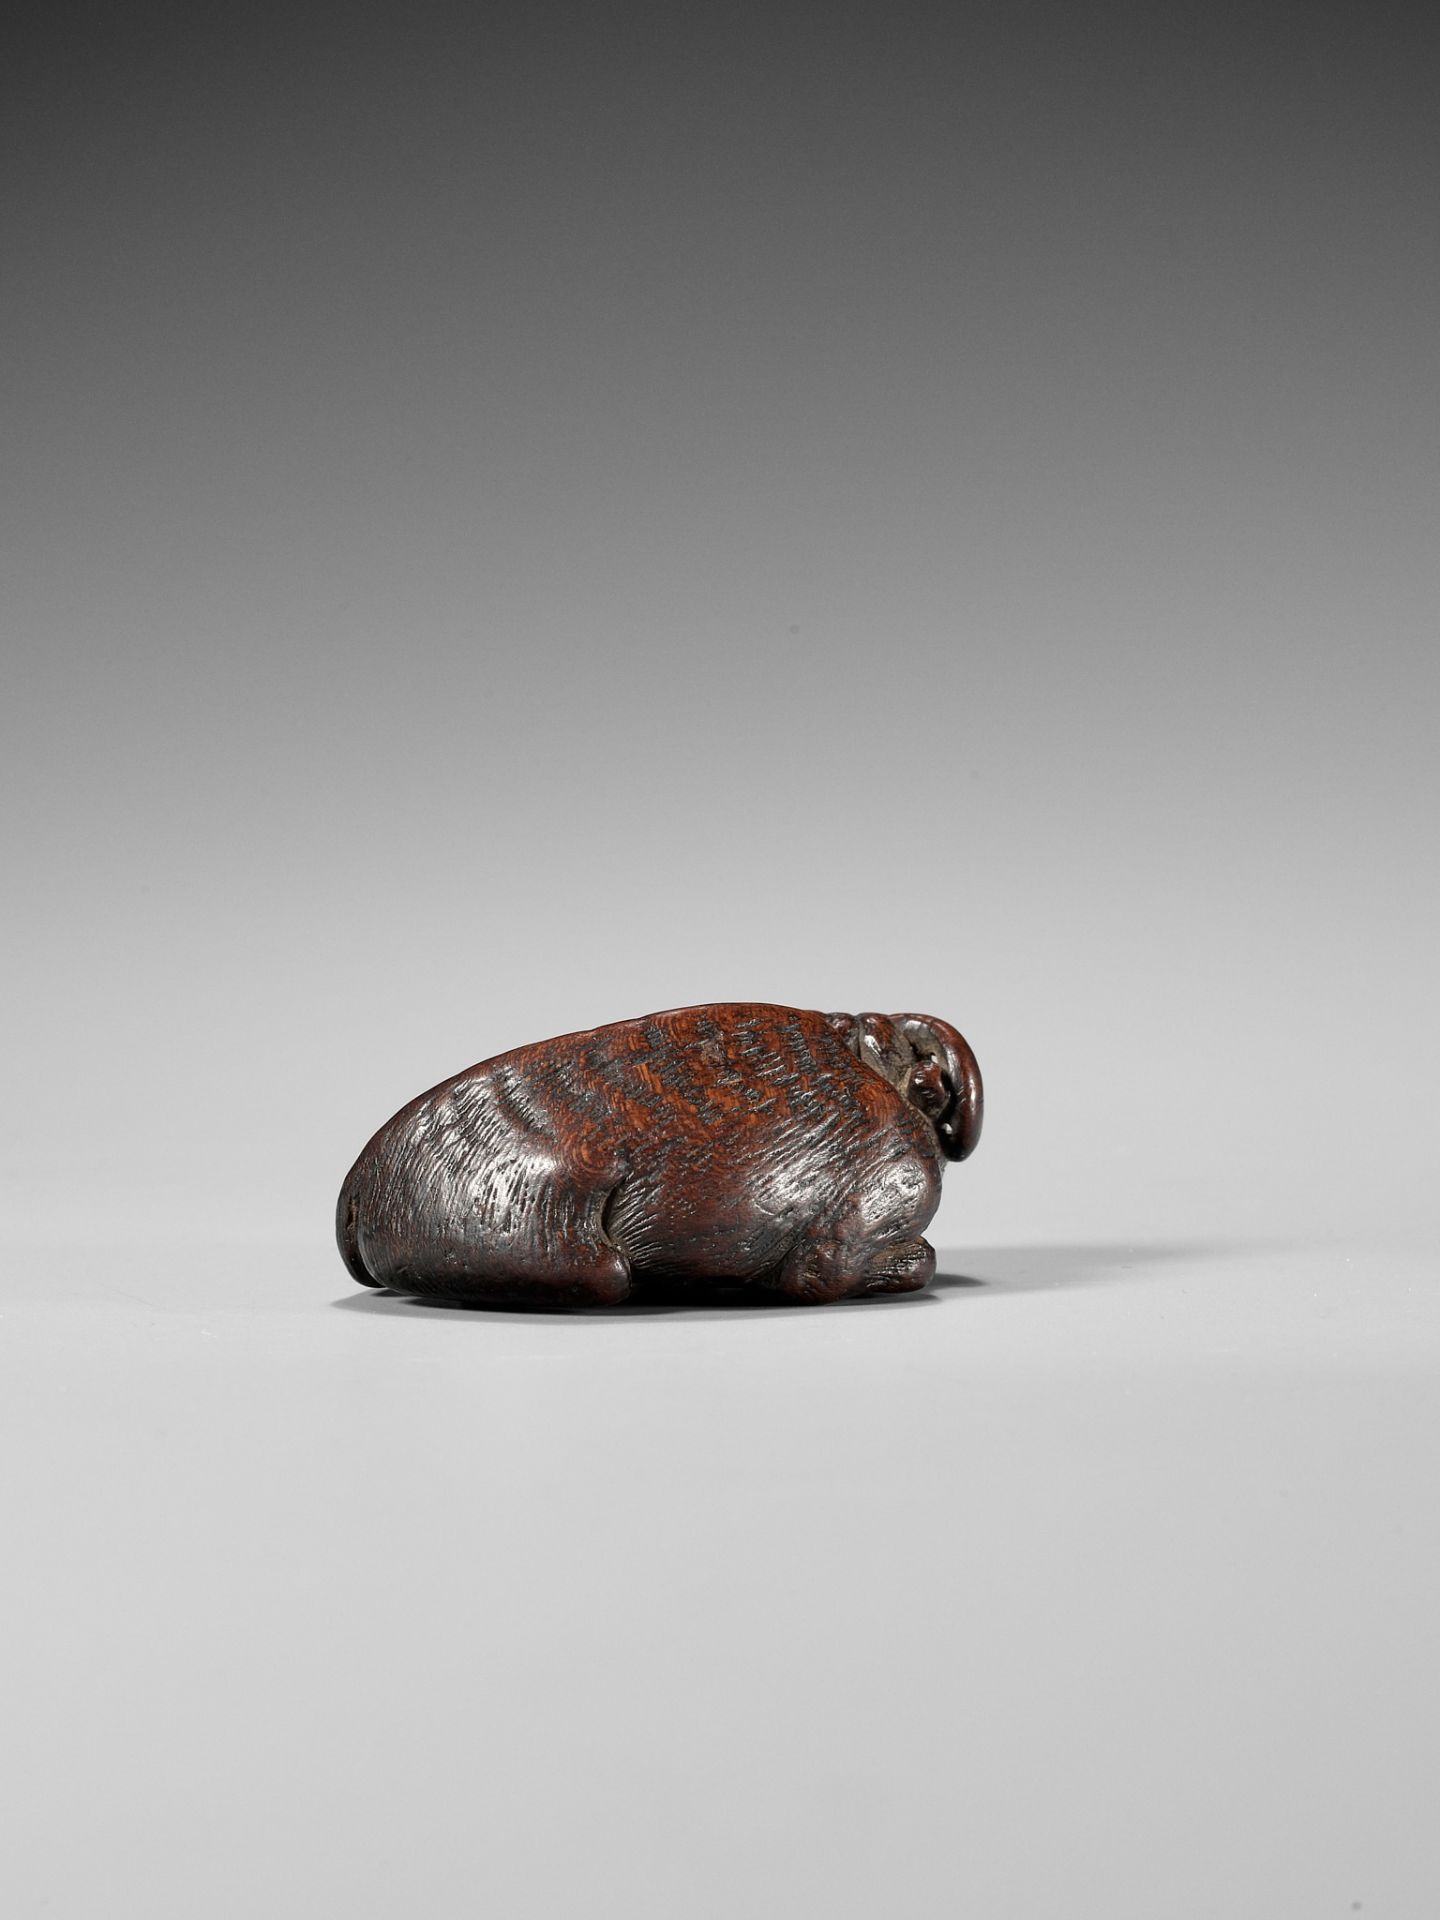 A SUPERB AND VERY RARE WOOD NETSUKE OF AN OX AND CALF, ATTRIBUTED TO TAMETAKA - Image 10 of 12